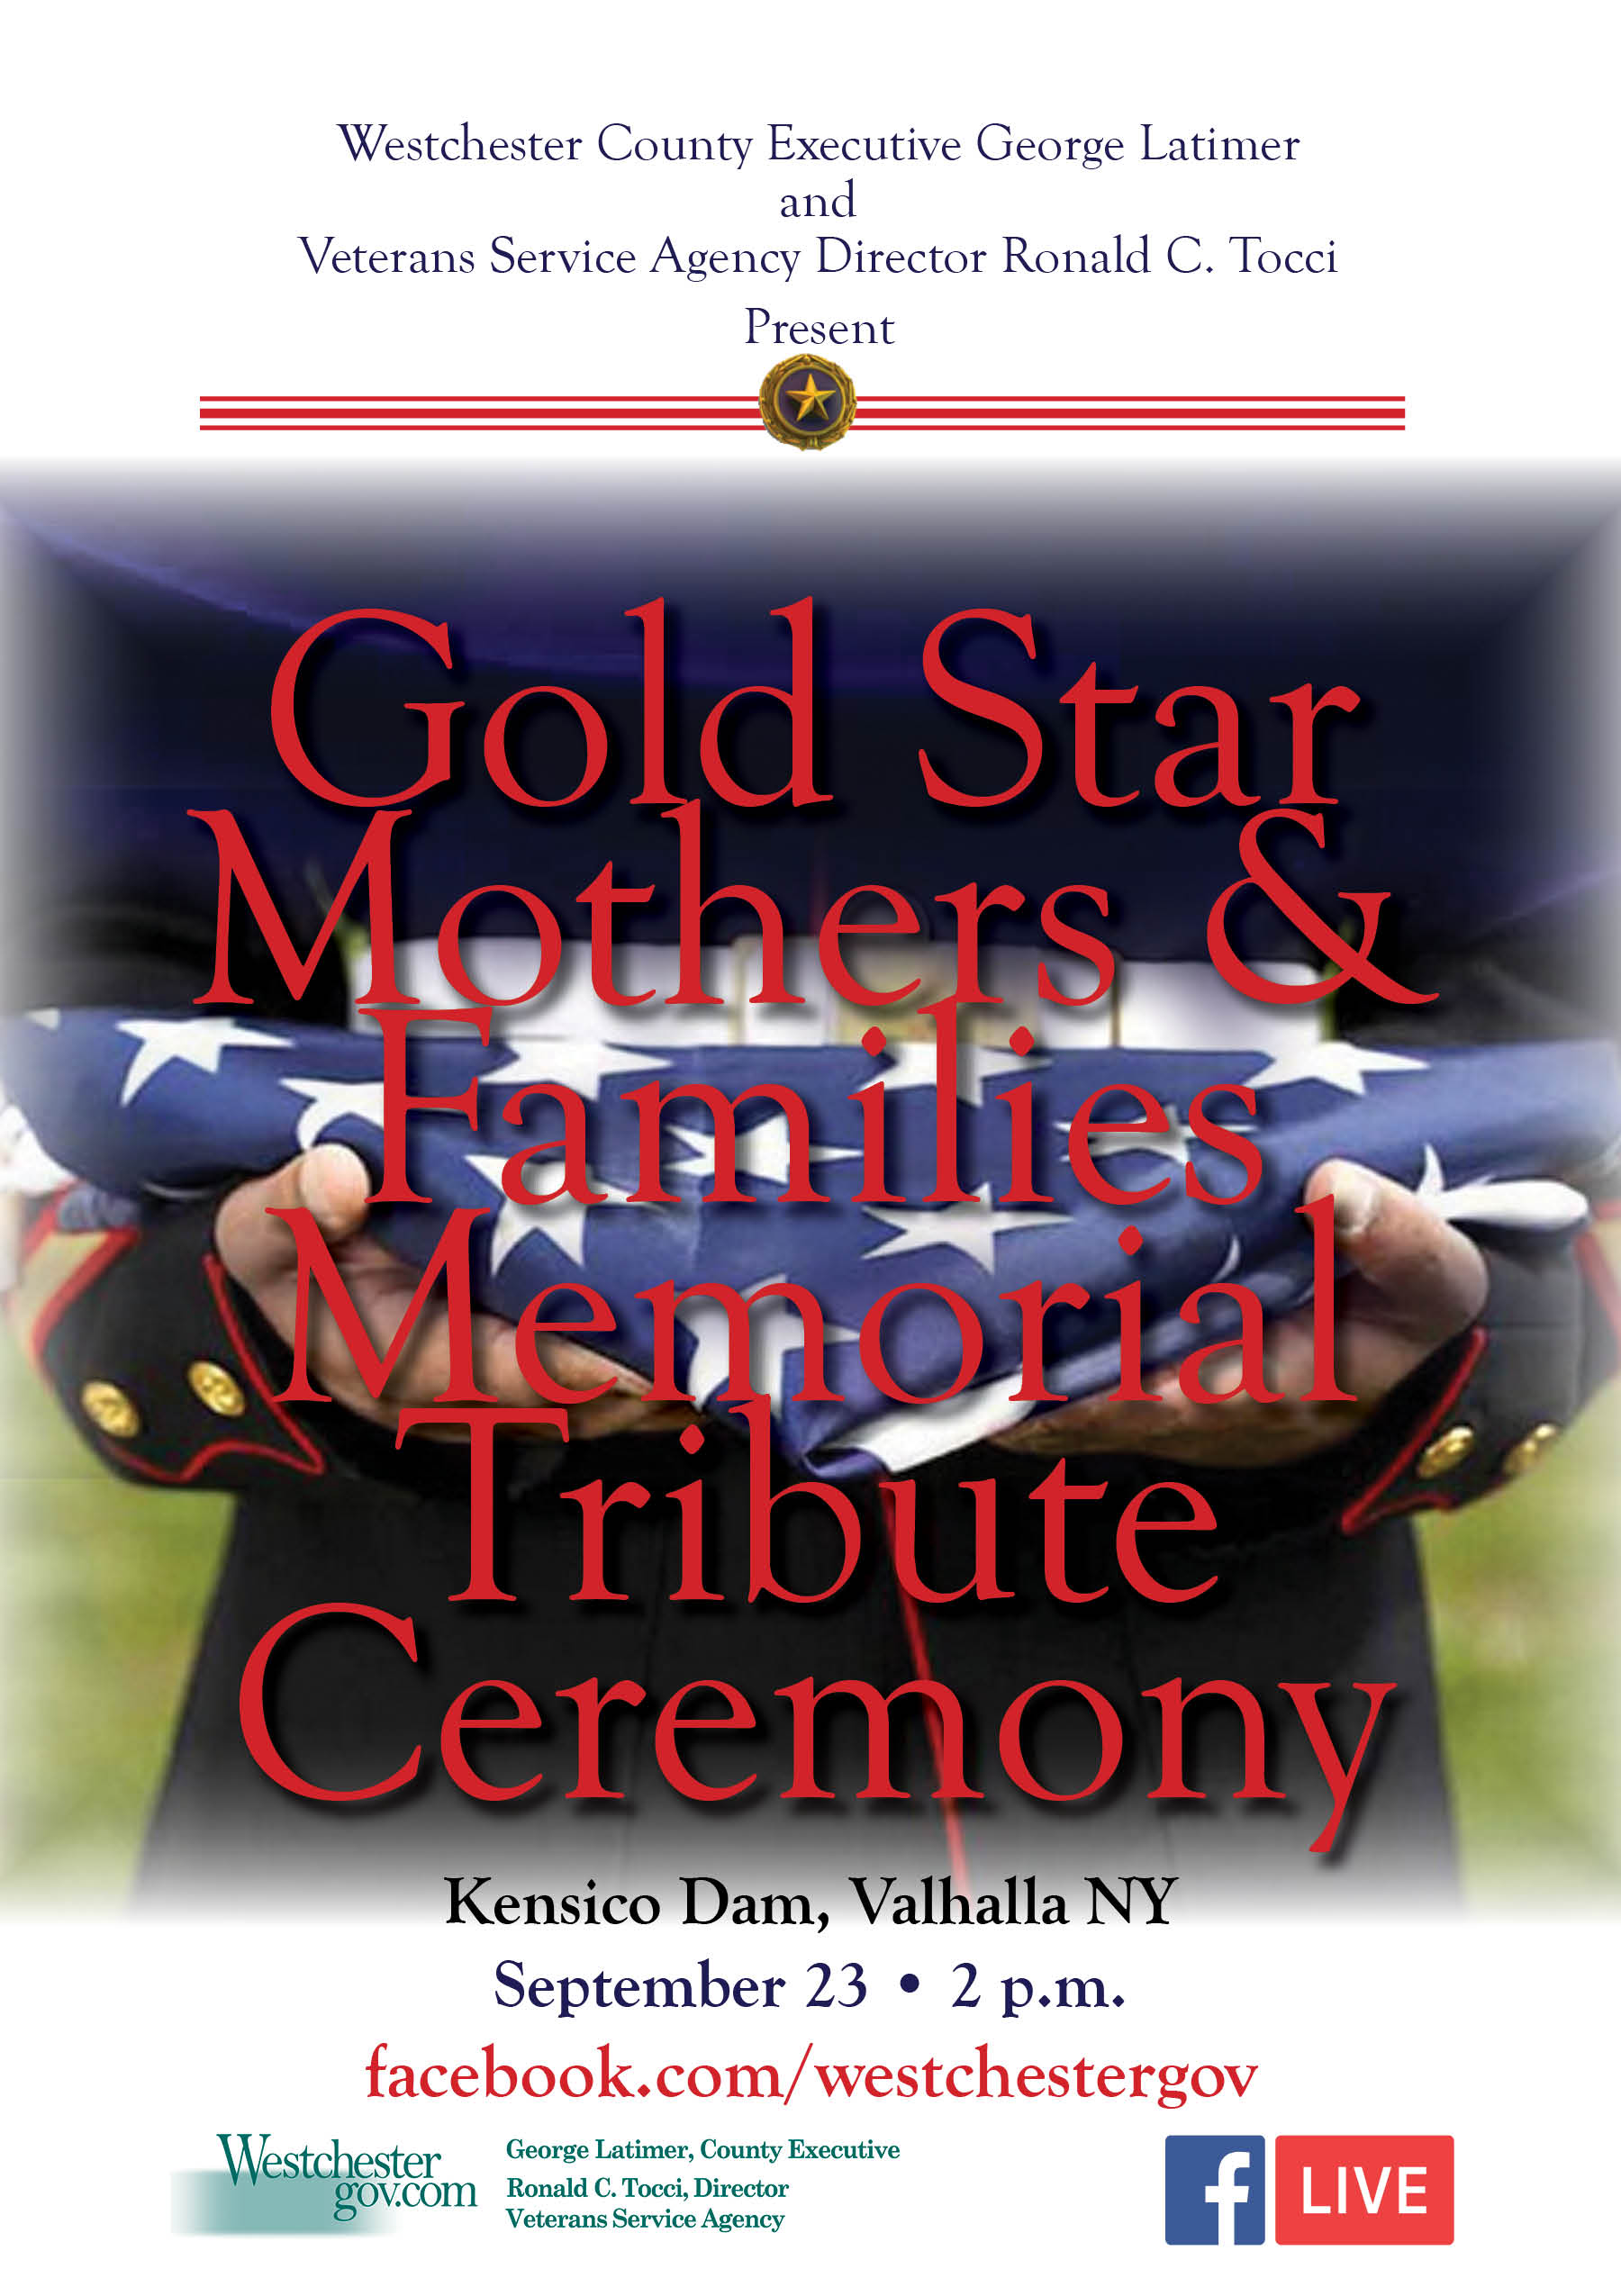 Title: Gold Star Mothers & Families Memorial Tribute Ceremony - Description: Westchester County Executive George Latimer and Veterans Service Agency Director Ronald C. Tocci Present Gold Star Mothers & Families Memorial Tribute Ceremony Kensico Dam, Valhalla NY September 23 • 2 p.m. Facebook.com/westchestergov